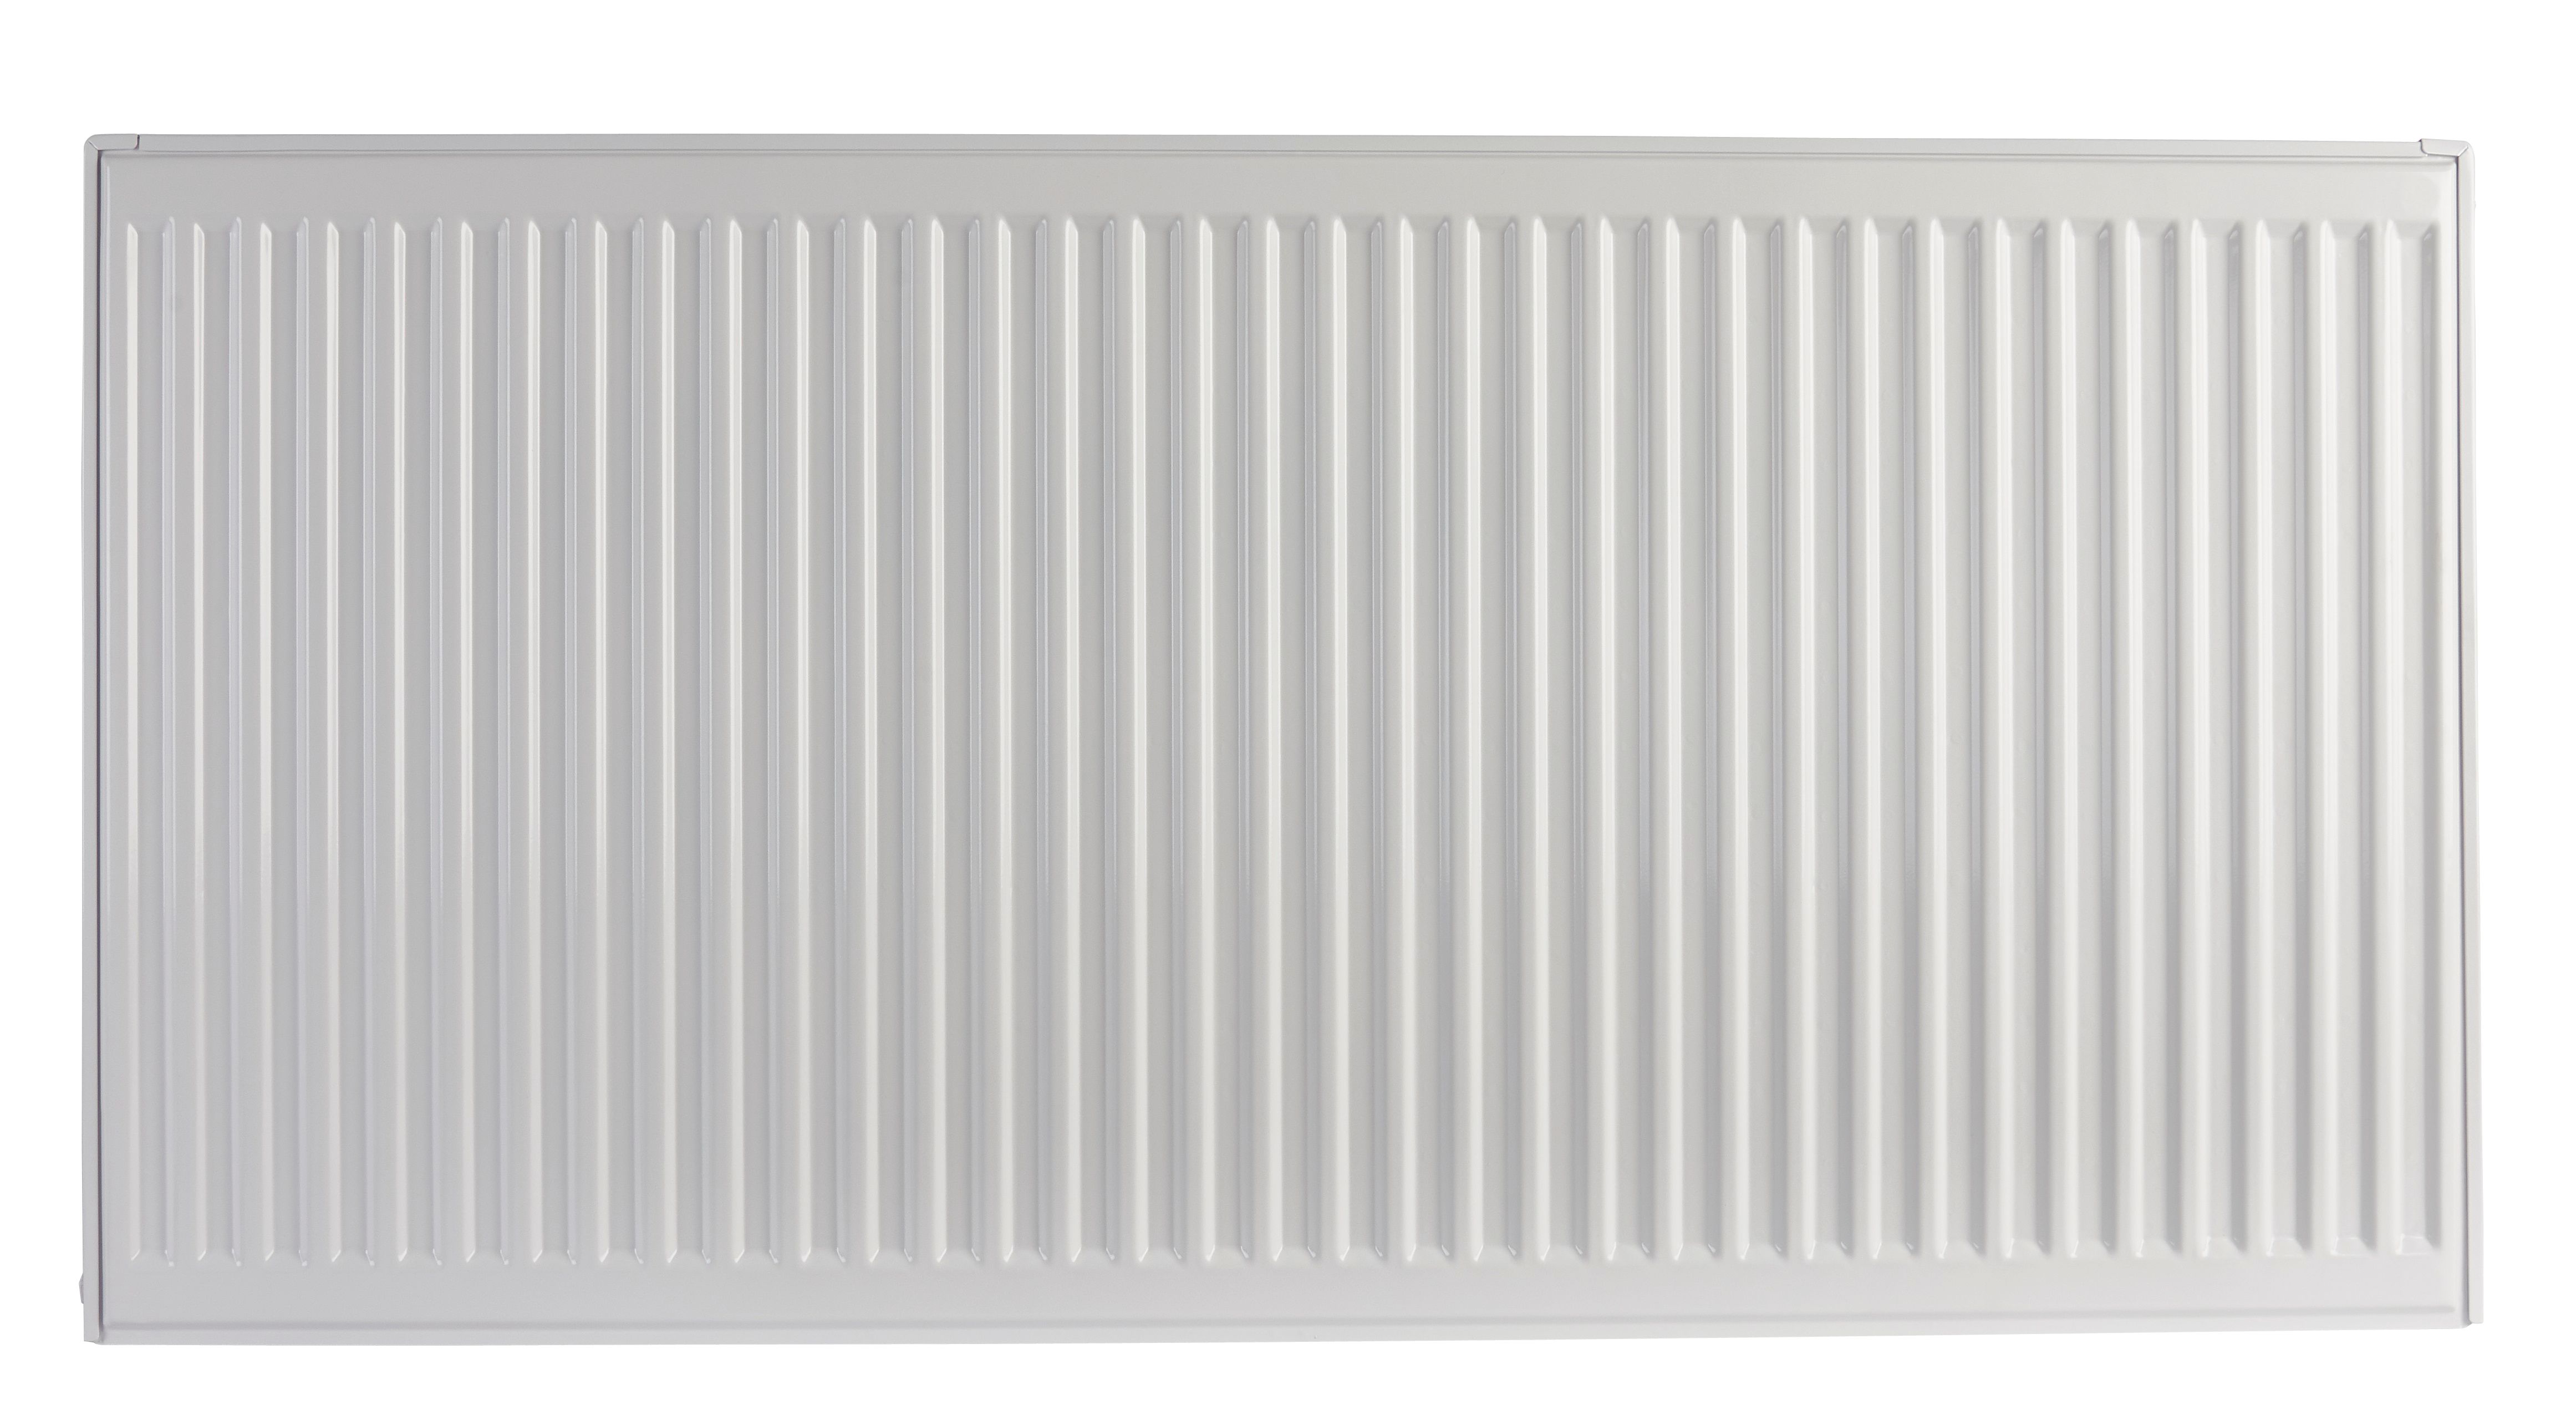 Image of Homeline by Stelrad 600 x 1000mm Type 22 Double Panel Premium Double Convector Radiator